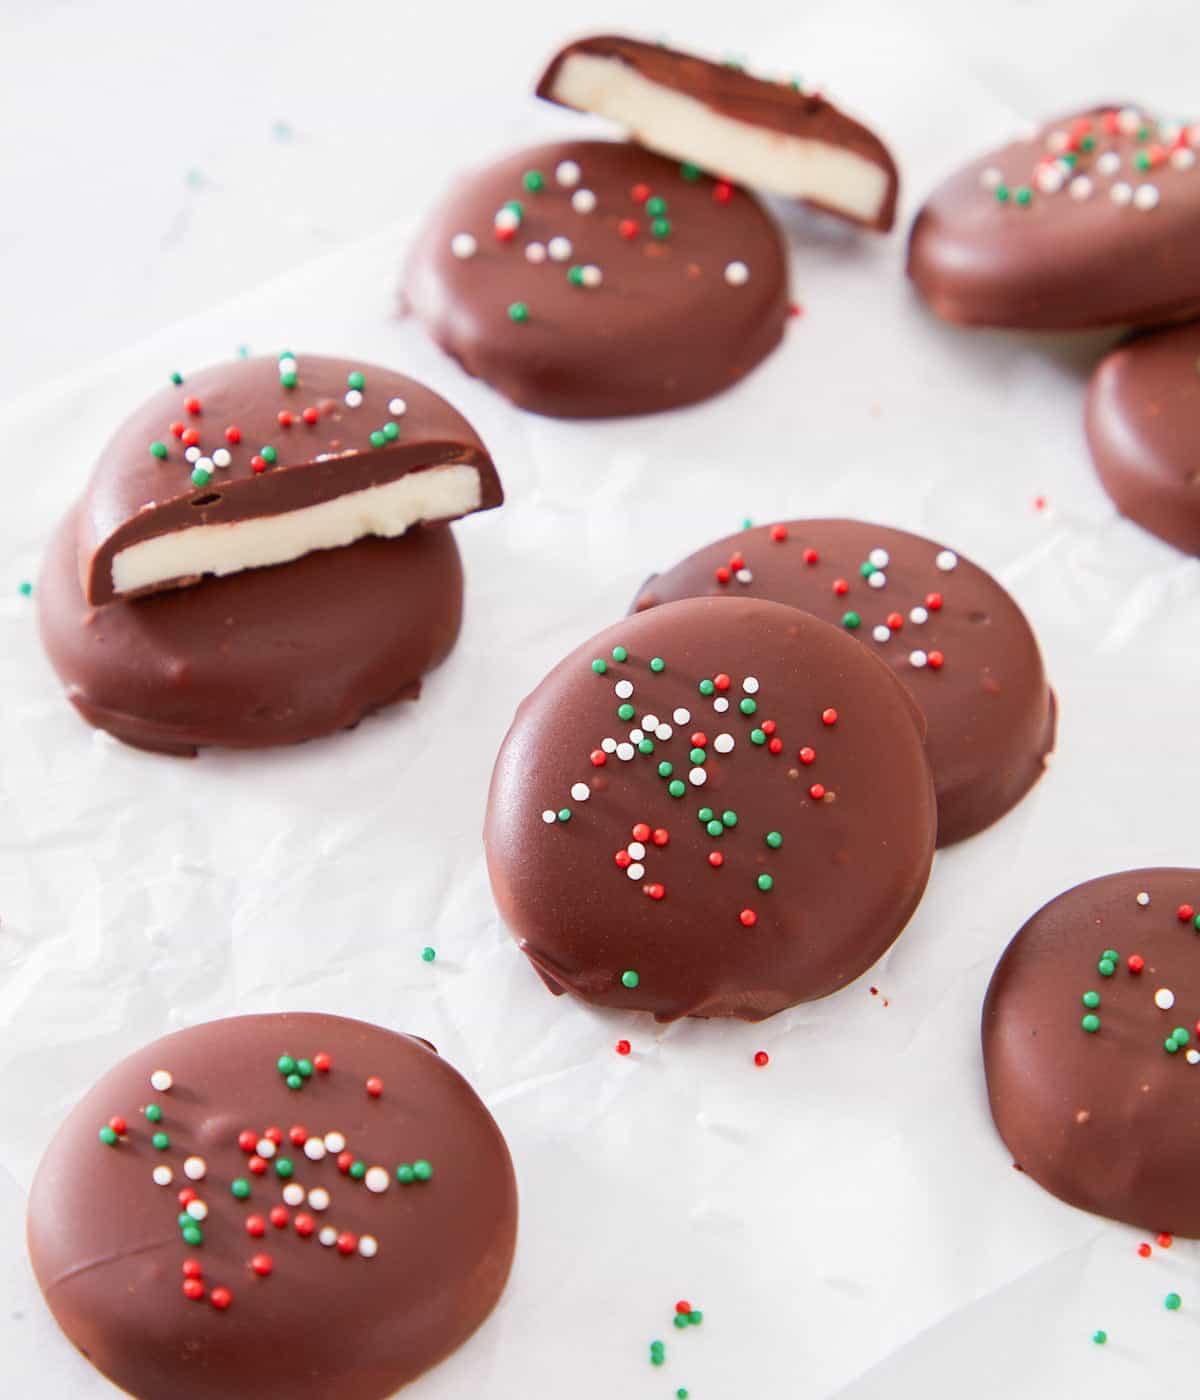 Several pieces of peppermint pies on a white surface with red, white and green sprinkles on top.  Some pieces are cut in half.